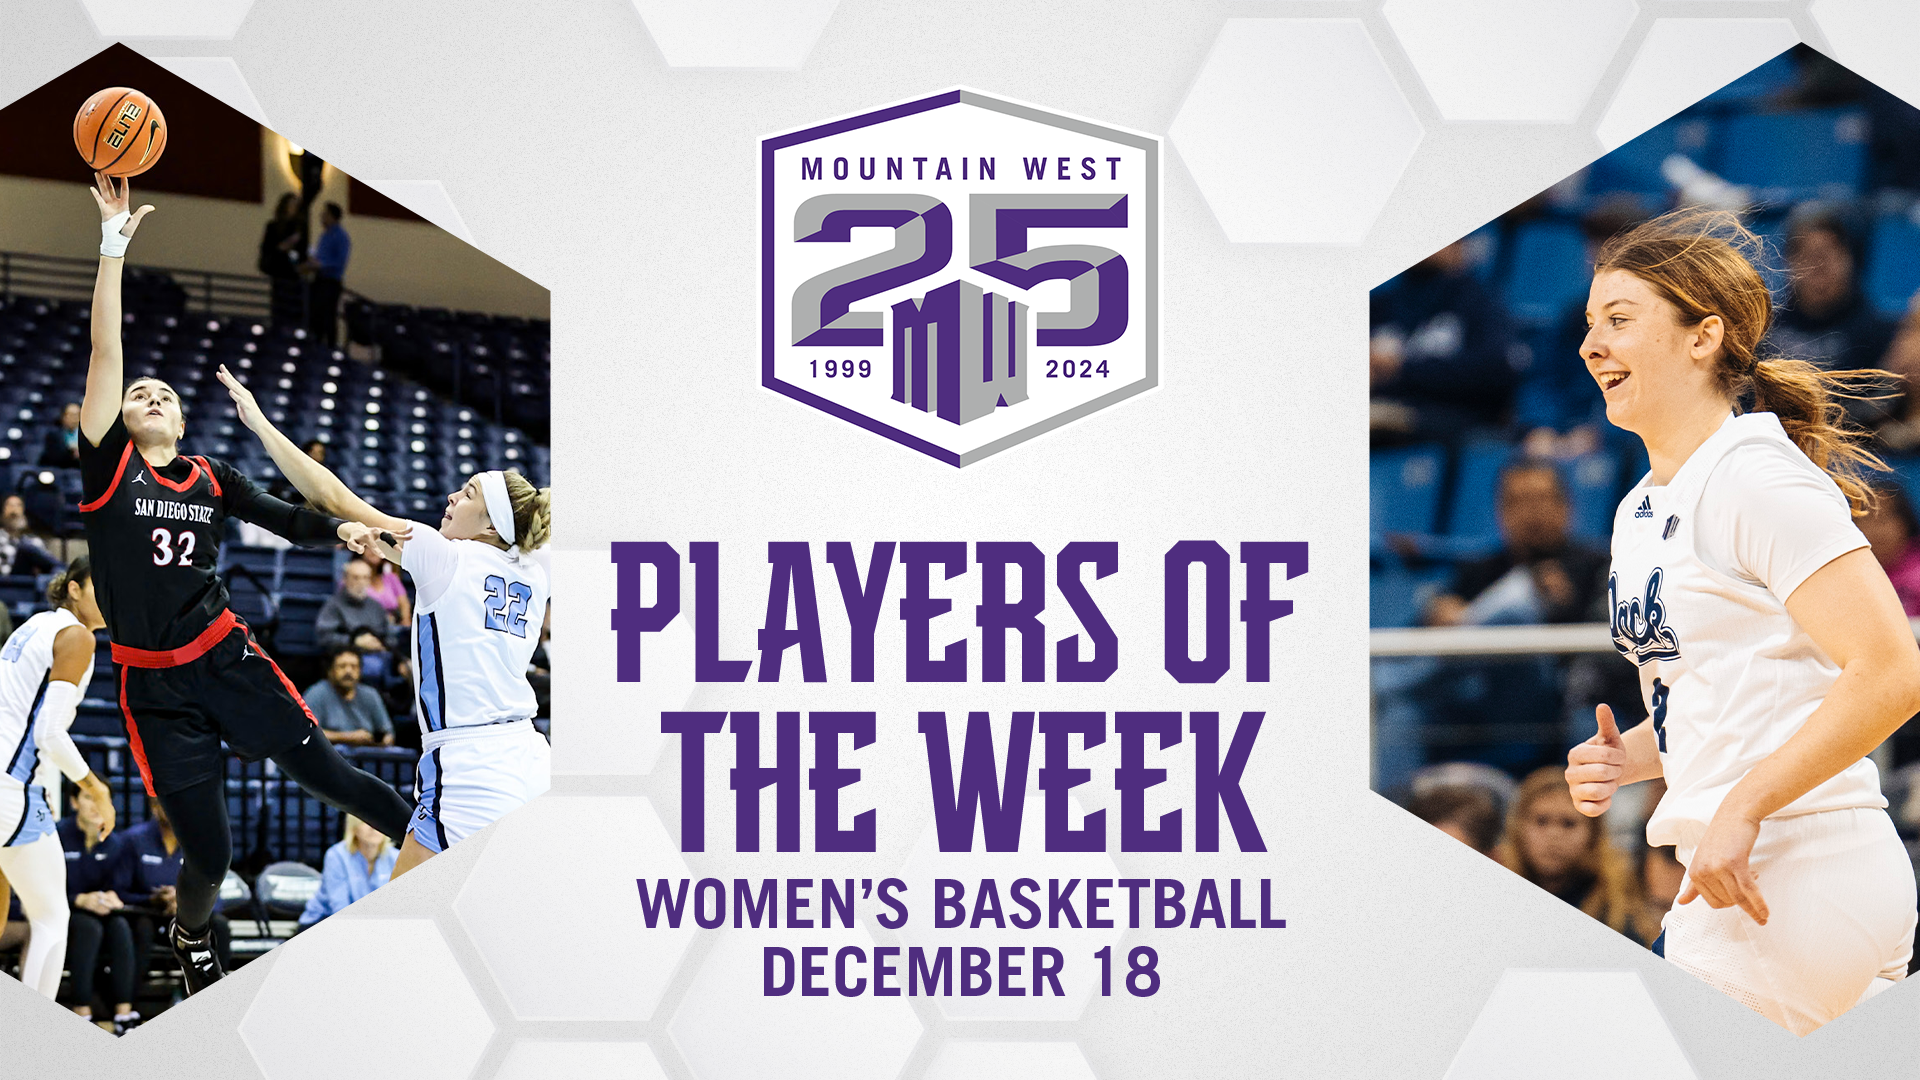 MW Women's Basketball Players of the Week - Dec. 18